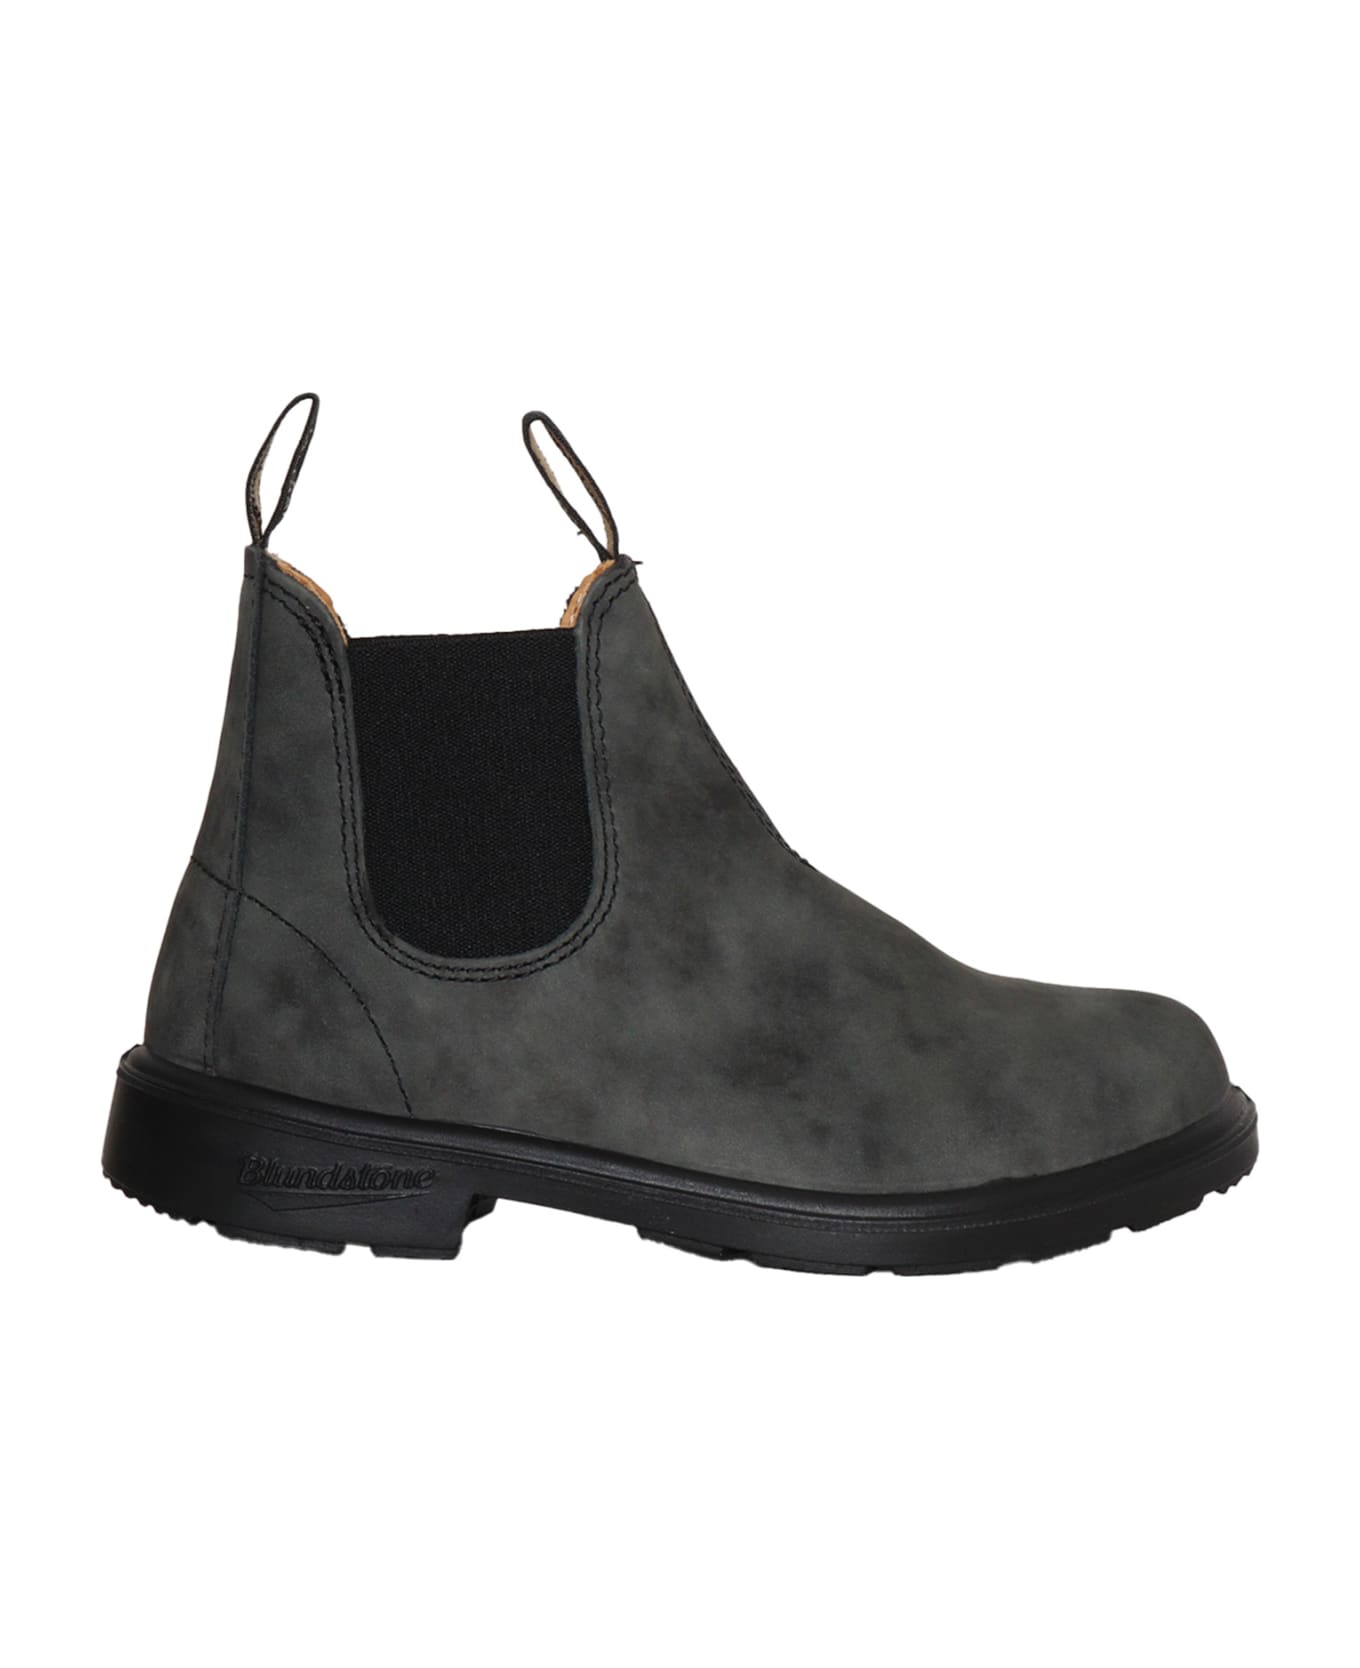 Blundstone Rustic Ankle Boots - BLACK